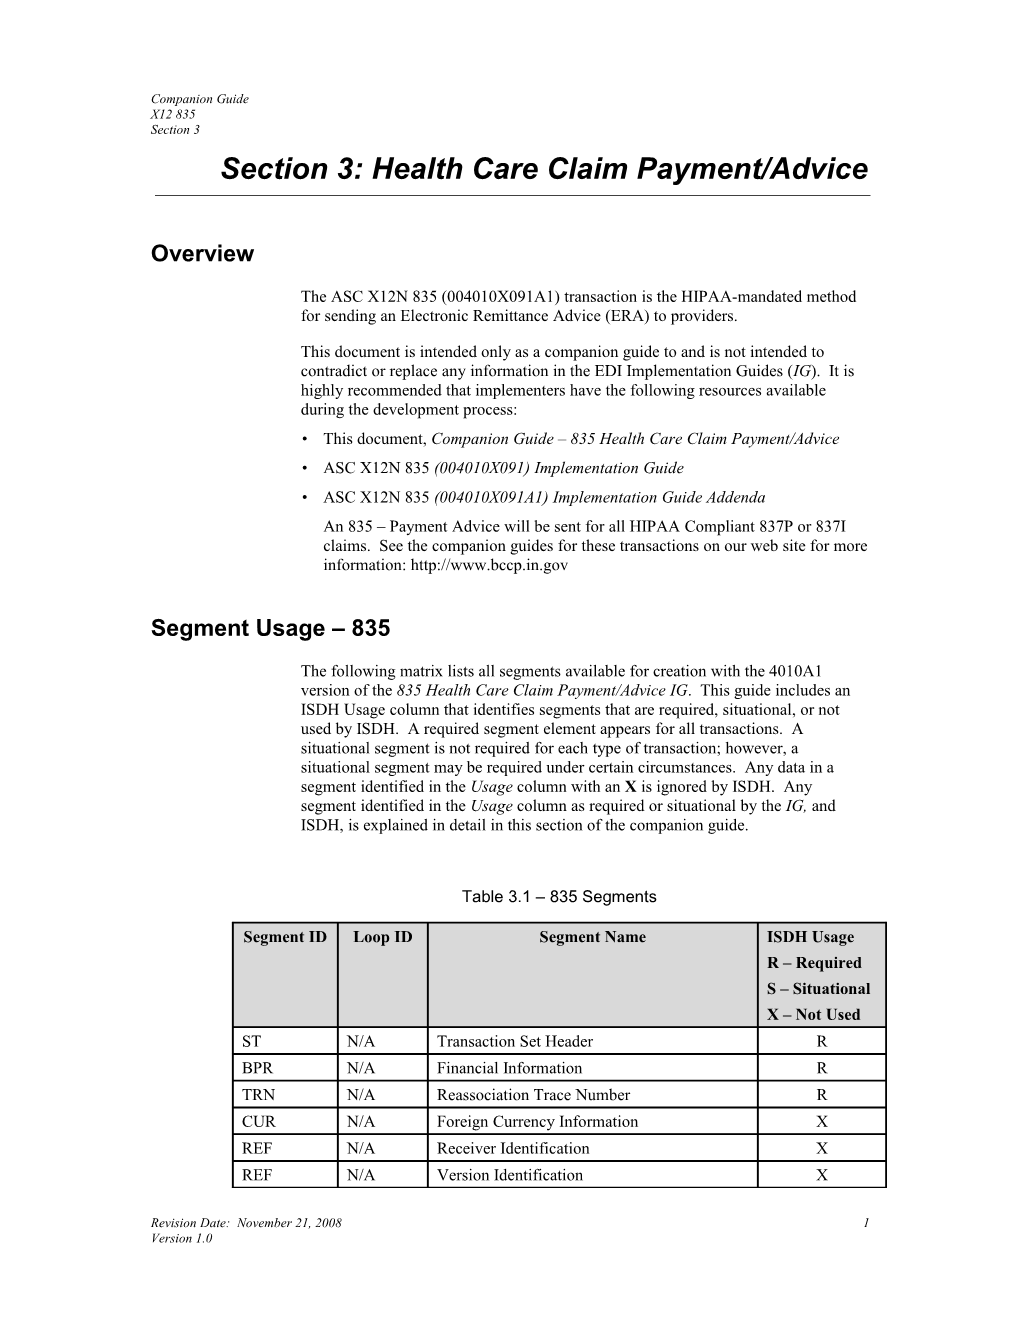 Section 3: Health Care Claim Payment/Advice